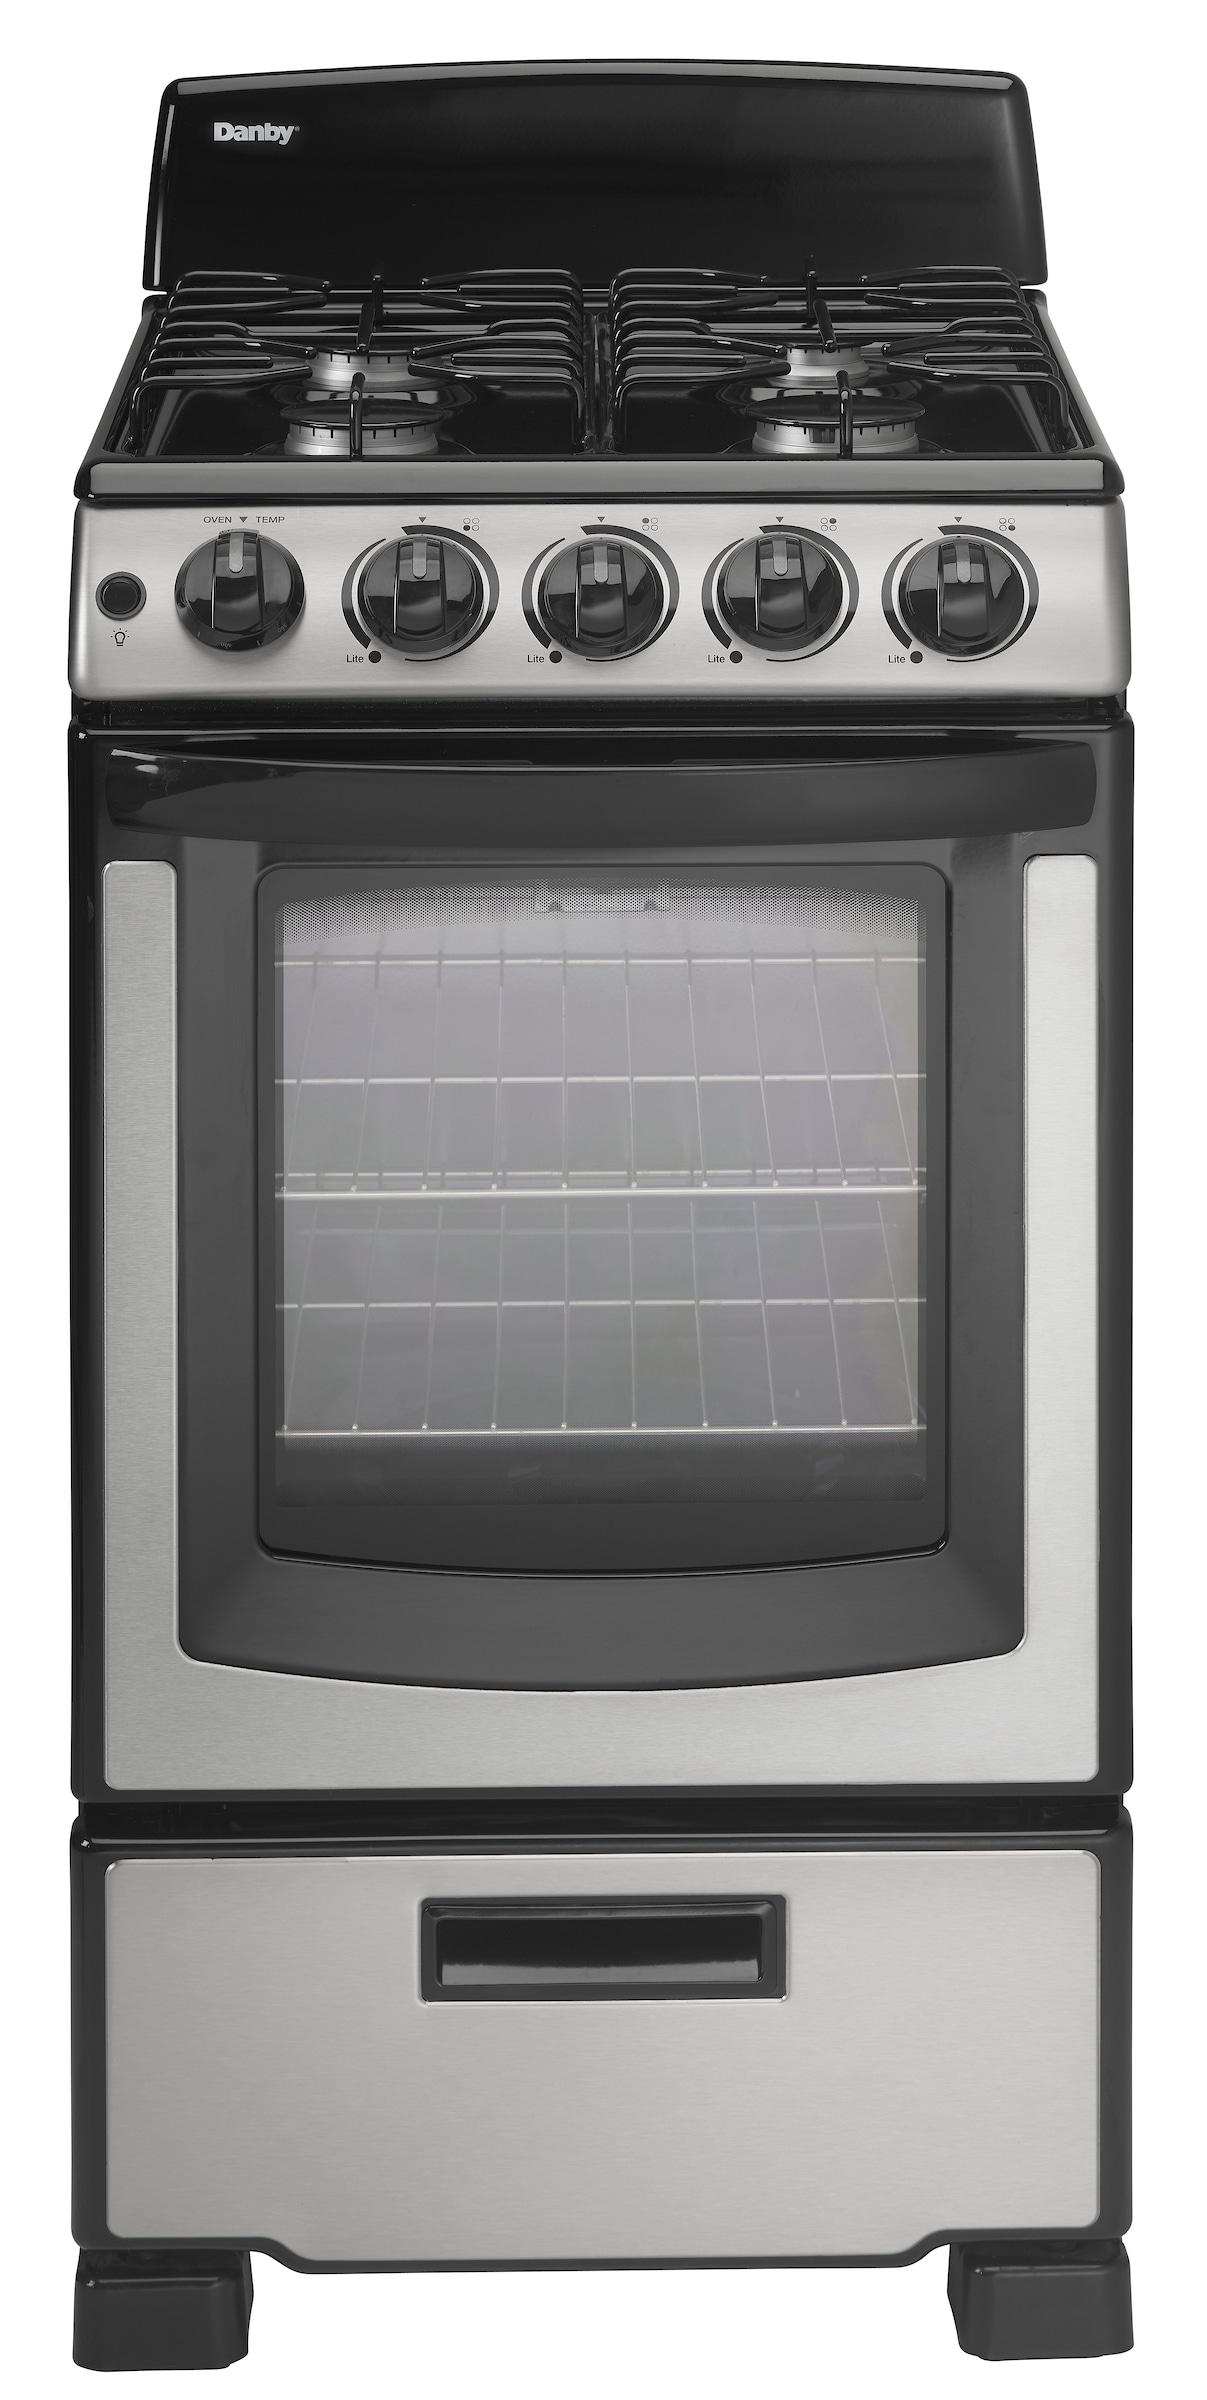  Danby Designer 20-In. Electric Range with Coil Elements and  2.3-Cu. Ft. Oven Capacity in Stainless Steel/Black : Appliances